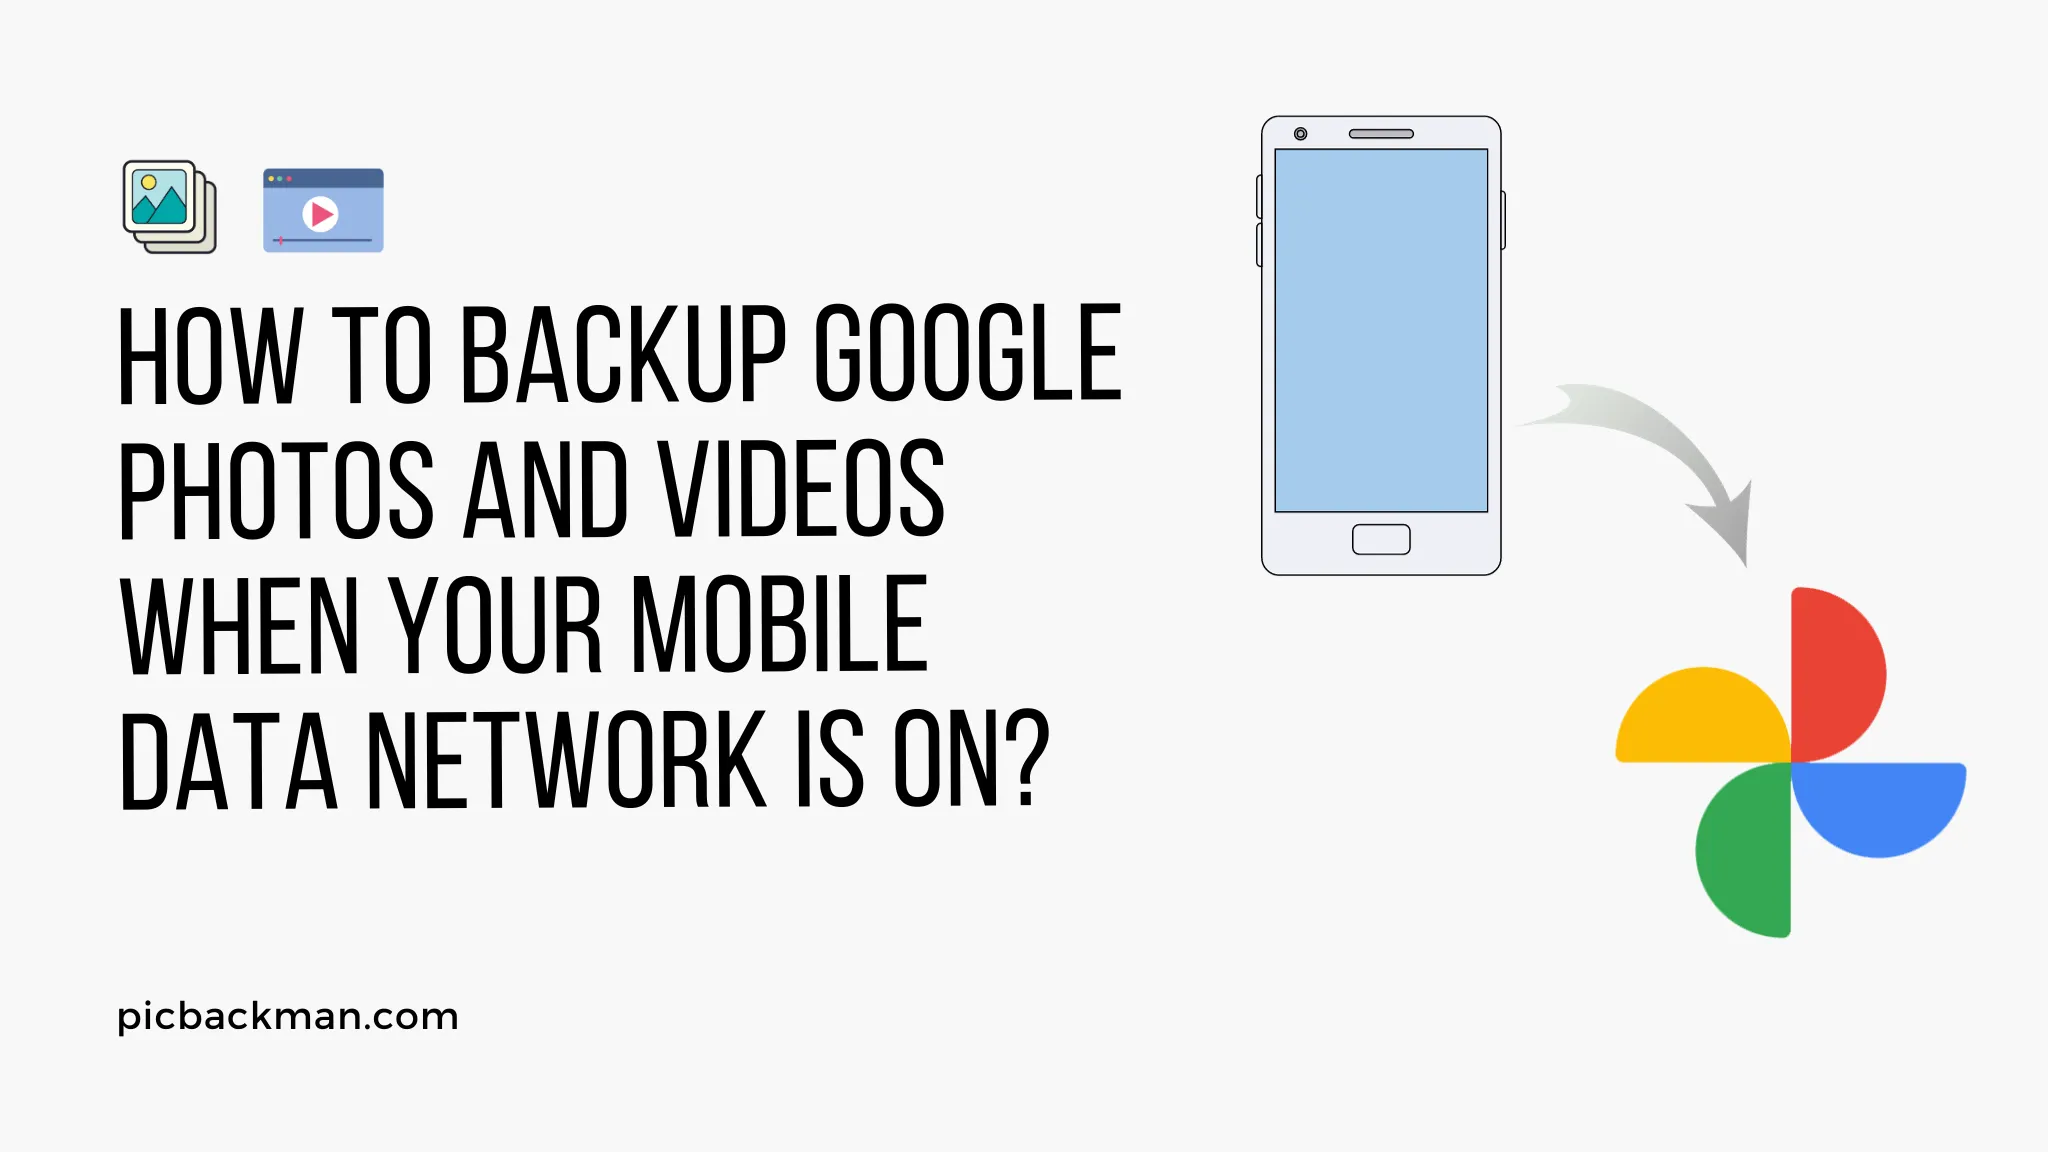 How to backup Google Photos and videos when your mobile data network is on?